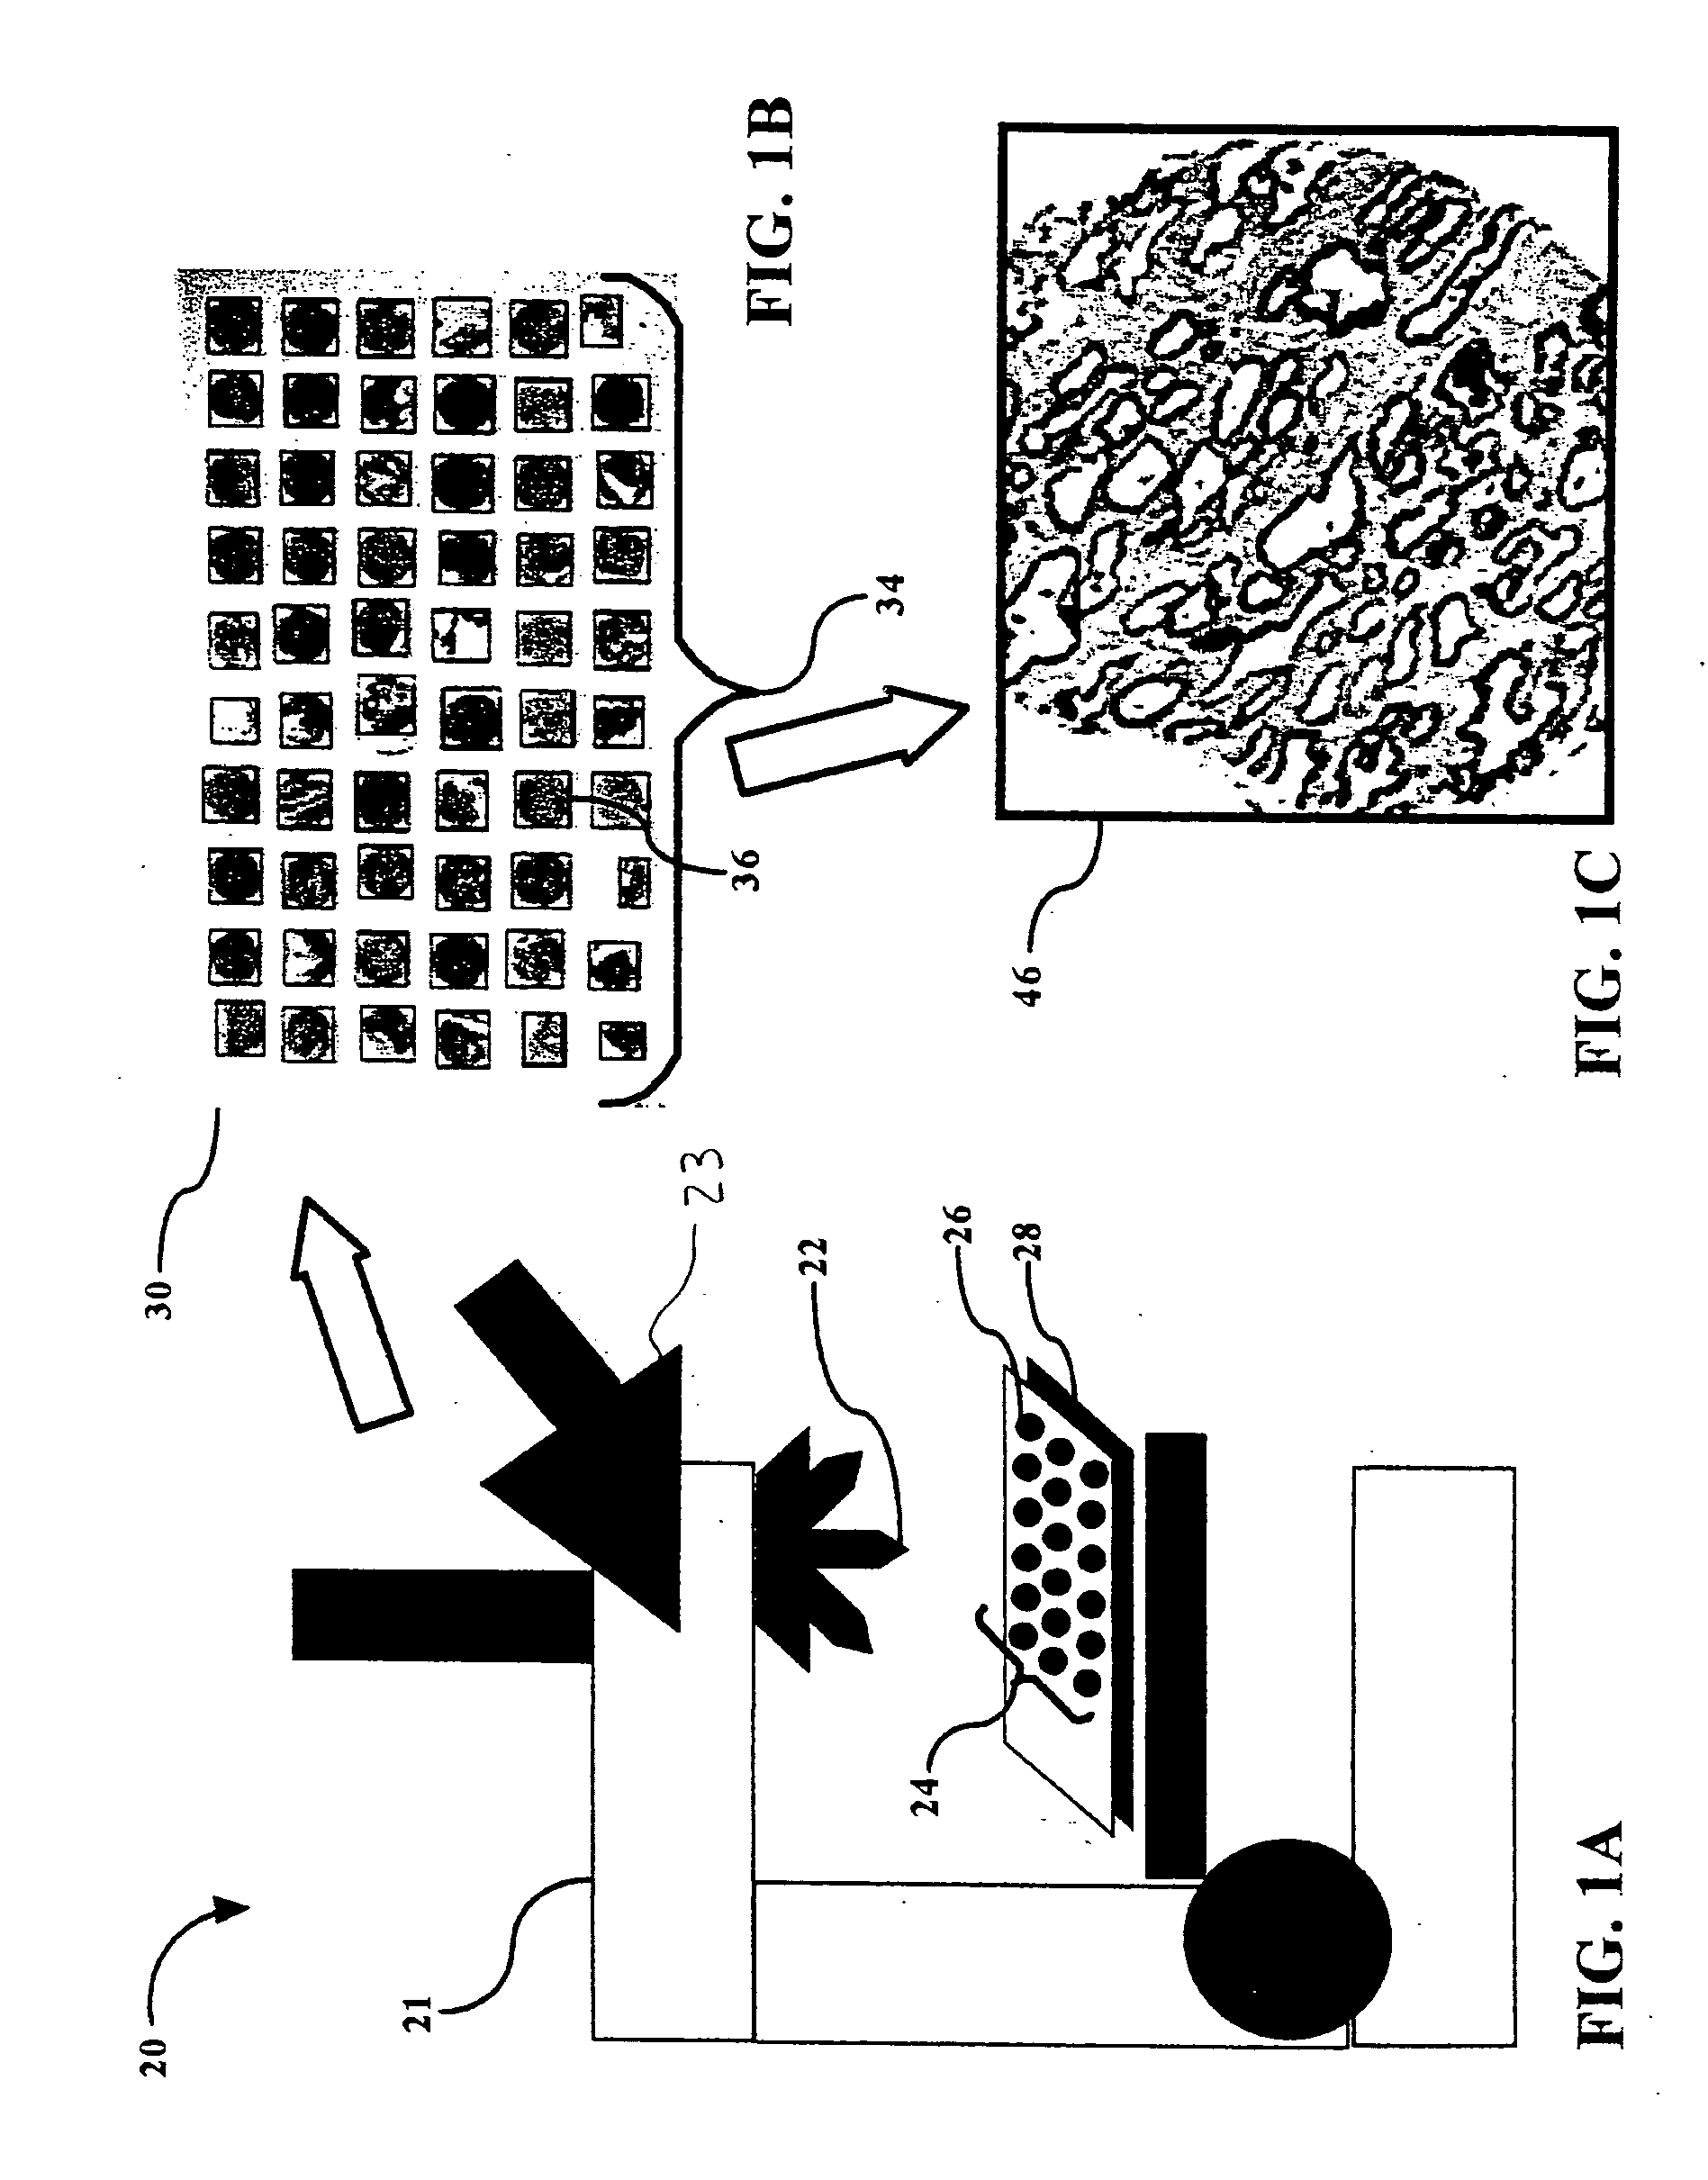 Automated microscope slide tissue sample mapping and image acquisition